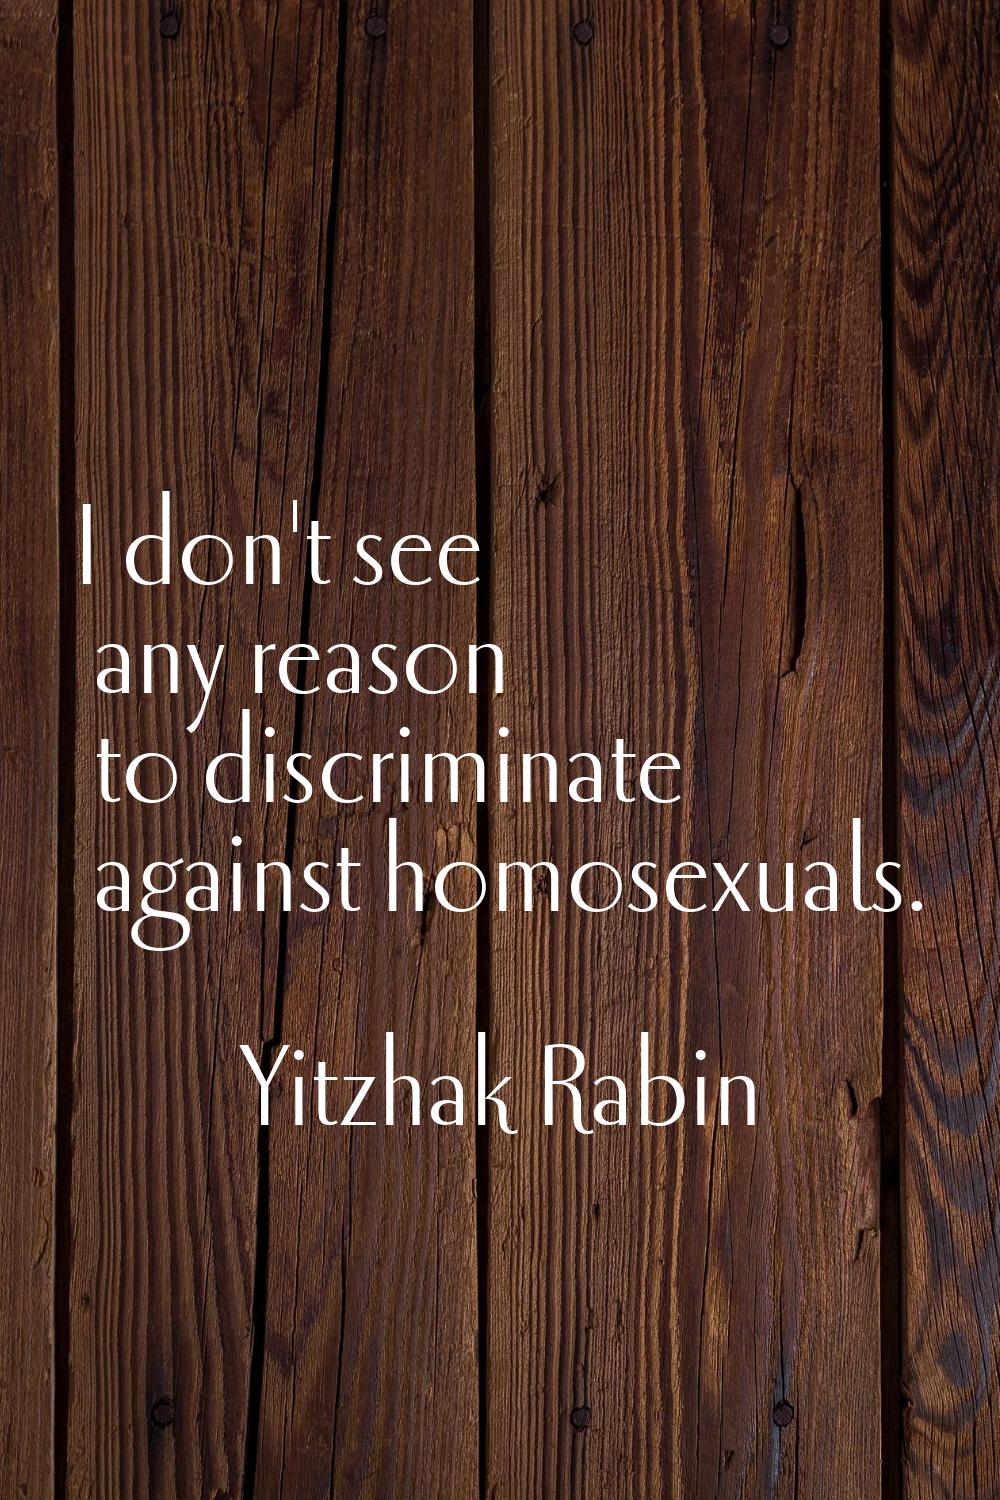 I don't see any reason to discriminate against homosexuals.